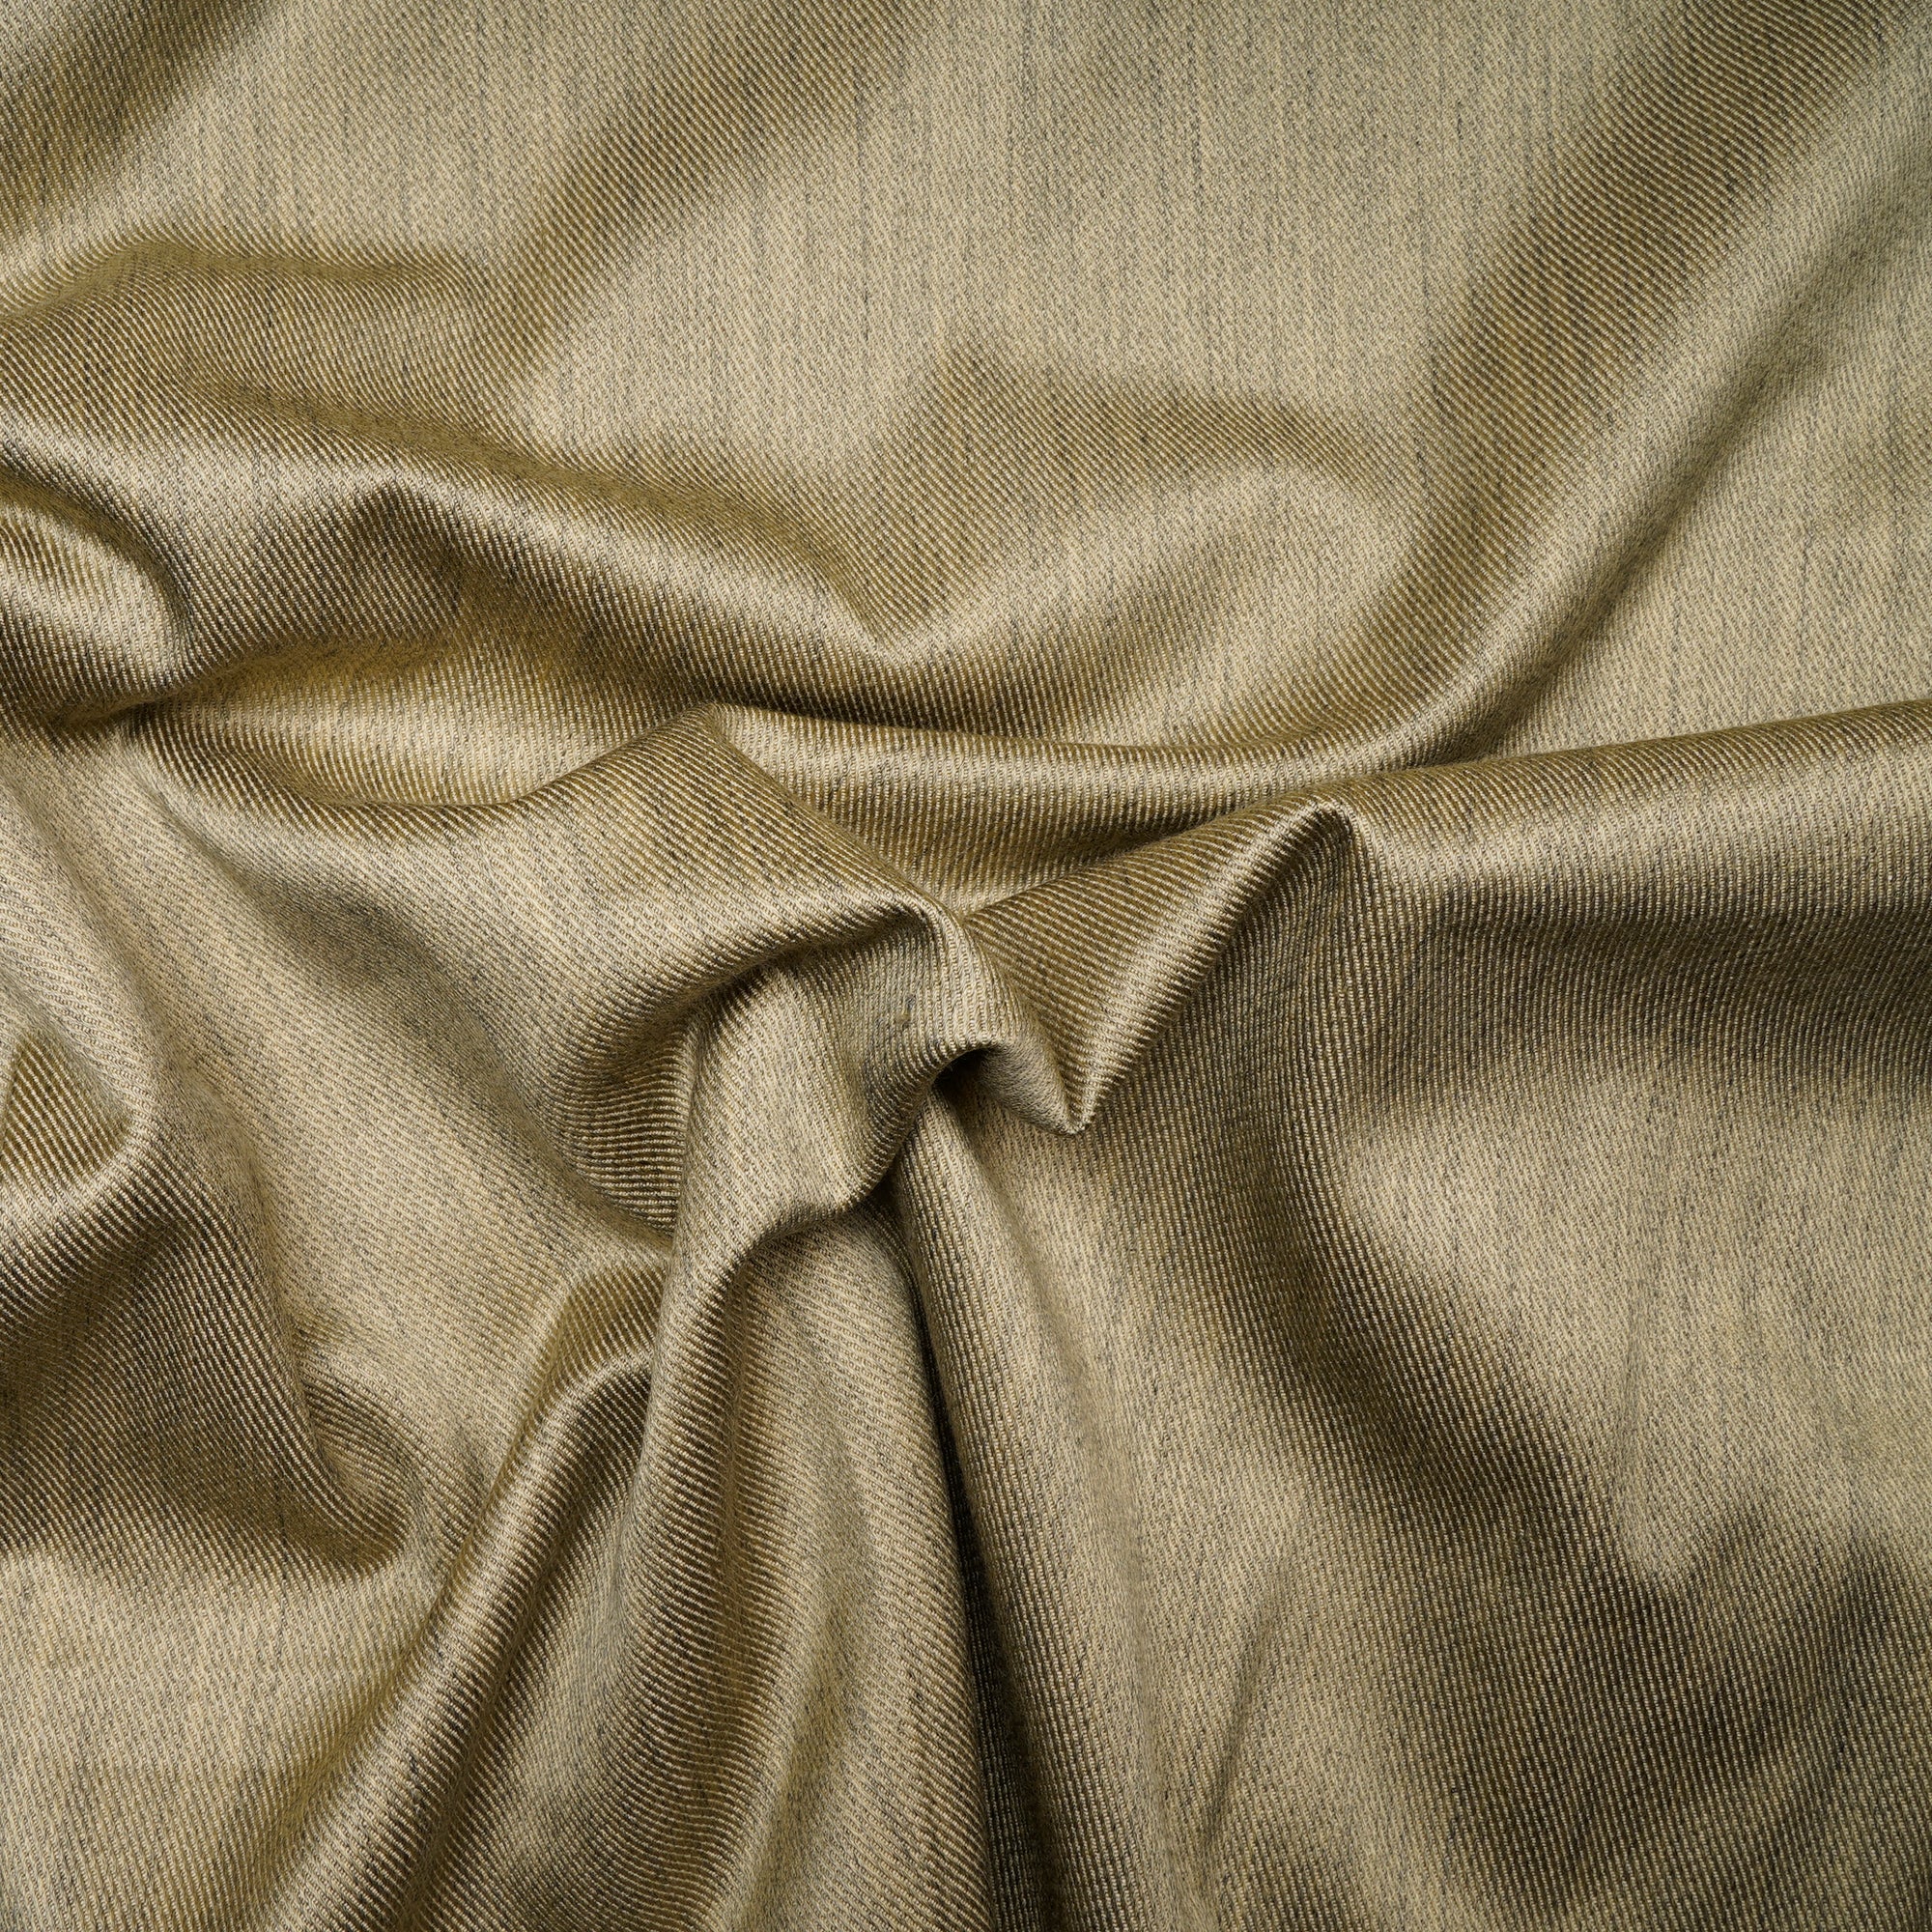 Light Olive Green Color Twill Linen Woolen Fabric